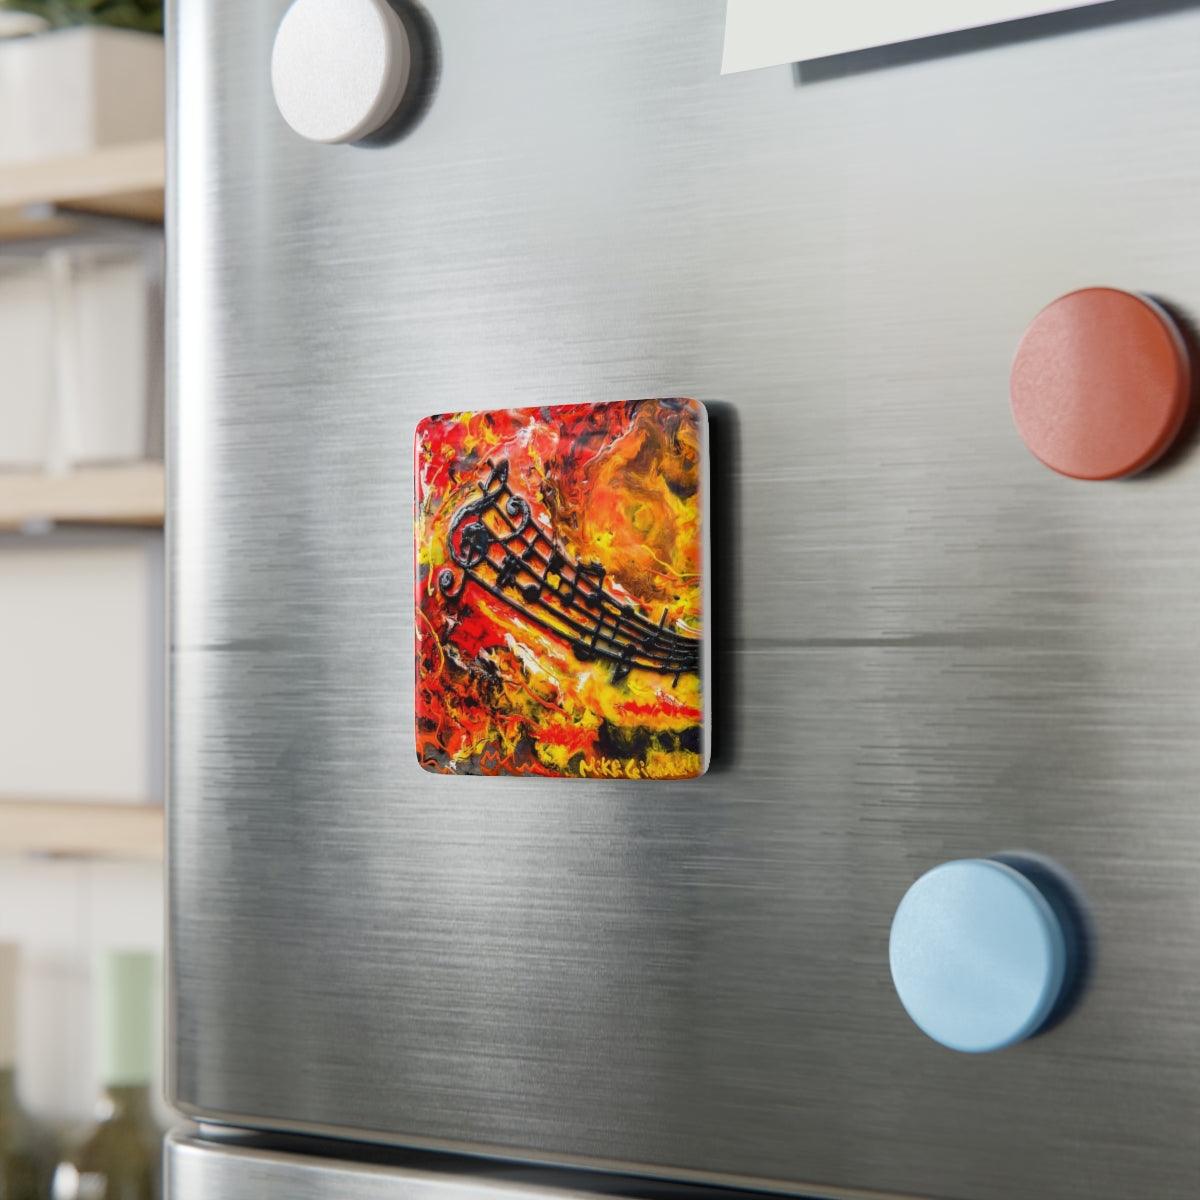 "Fiery Notes" Porcelain Magnet, Square-Home Decor - Mike Giannella - Encaustic Painting - Mixed Media Artist - Art Prints